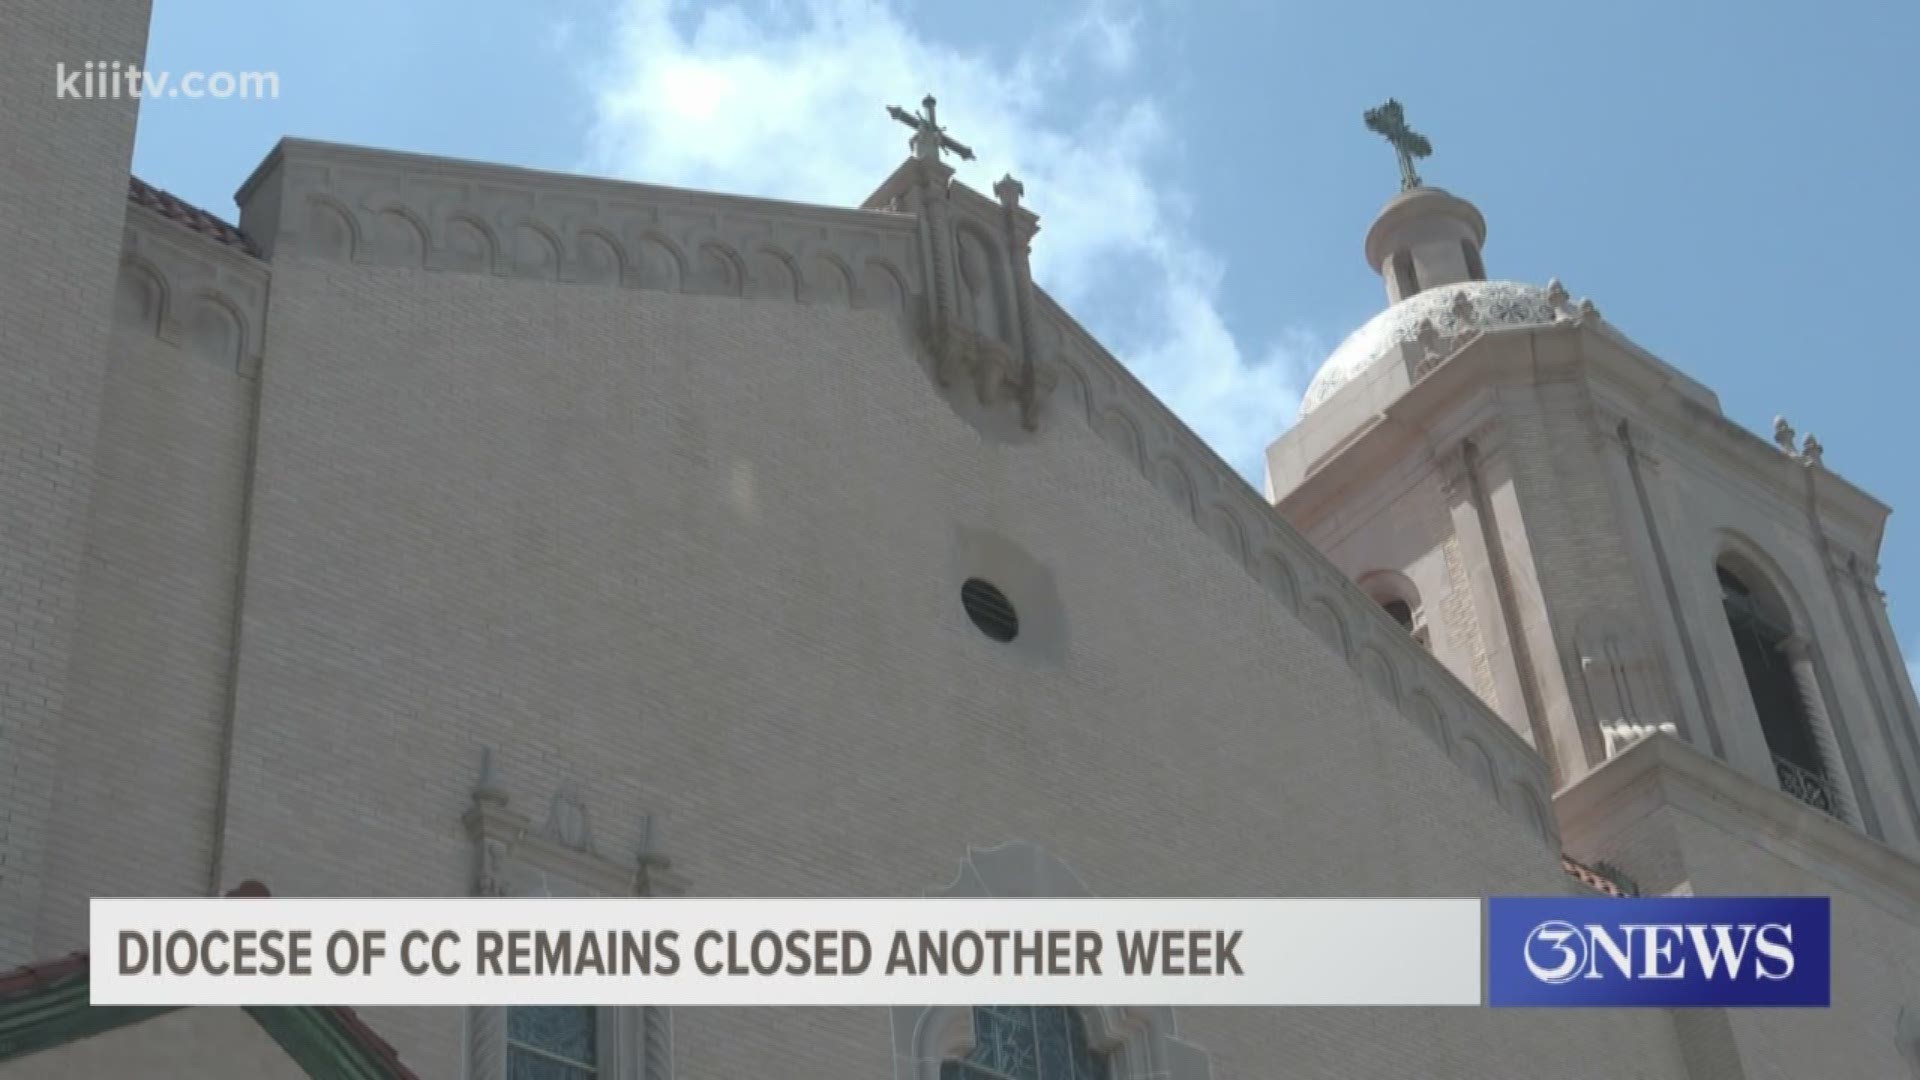 Churches in the Corpus Christi diocese will open their doors on the weekend of May 9.